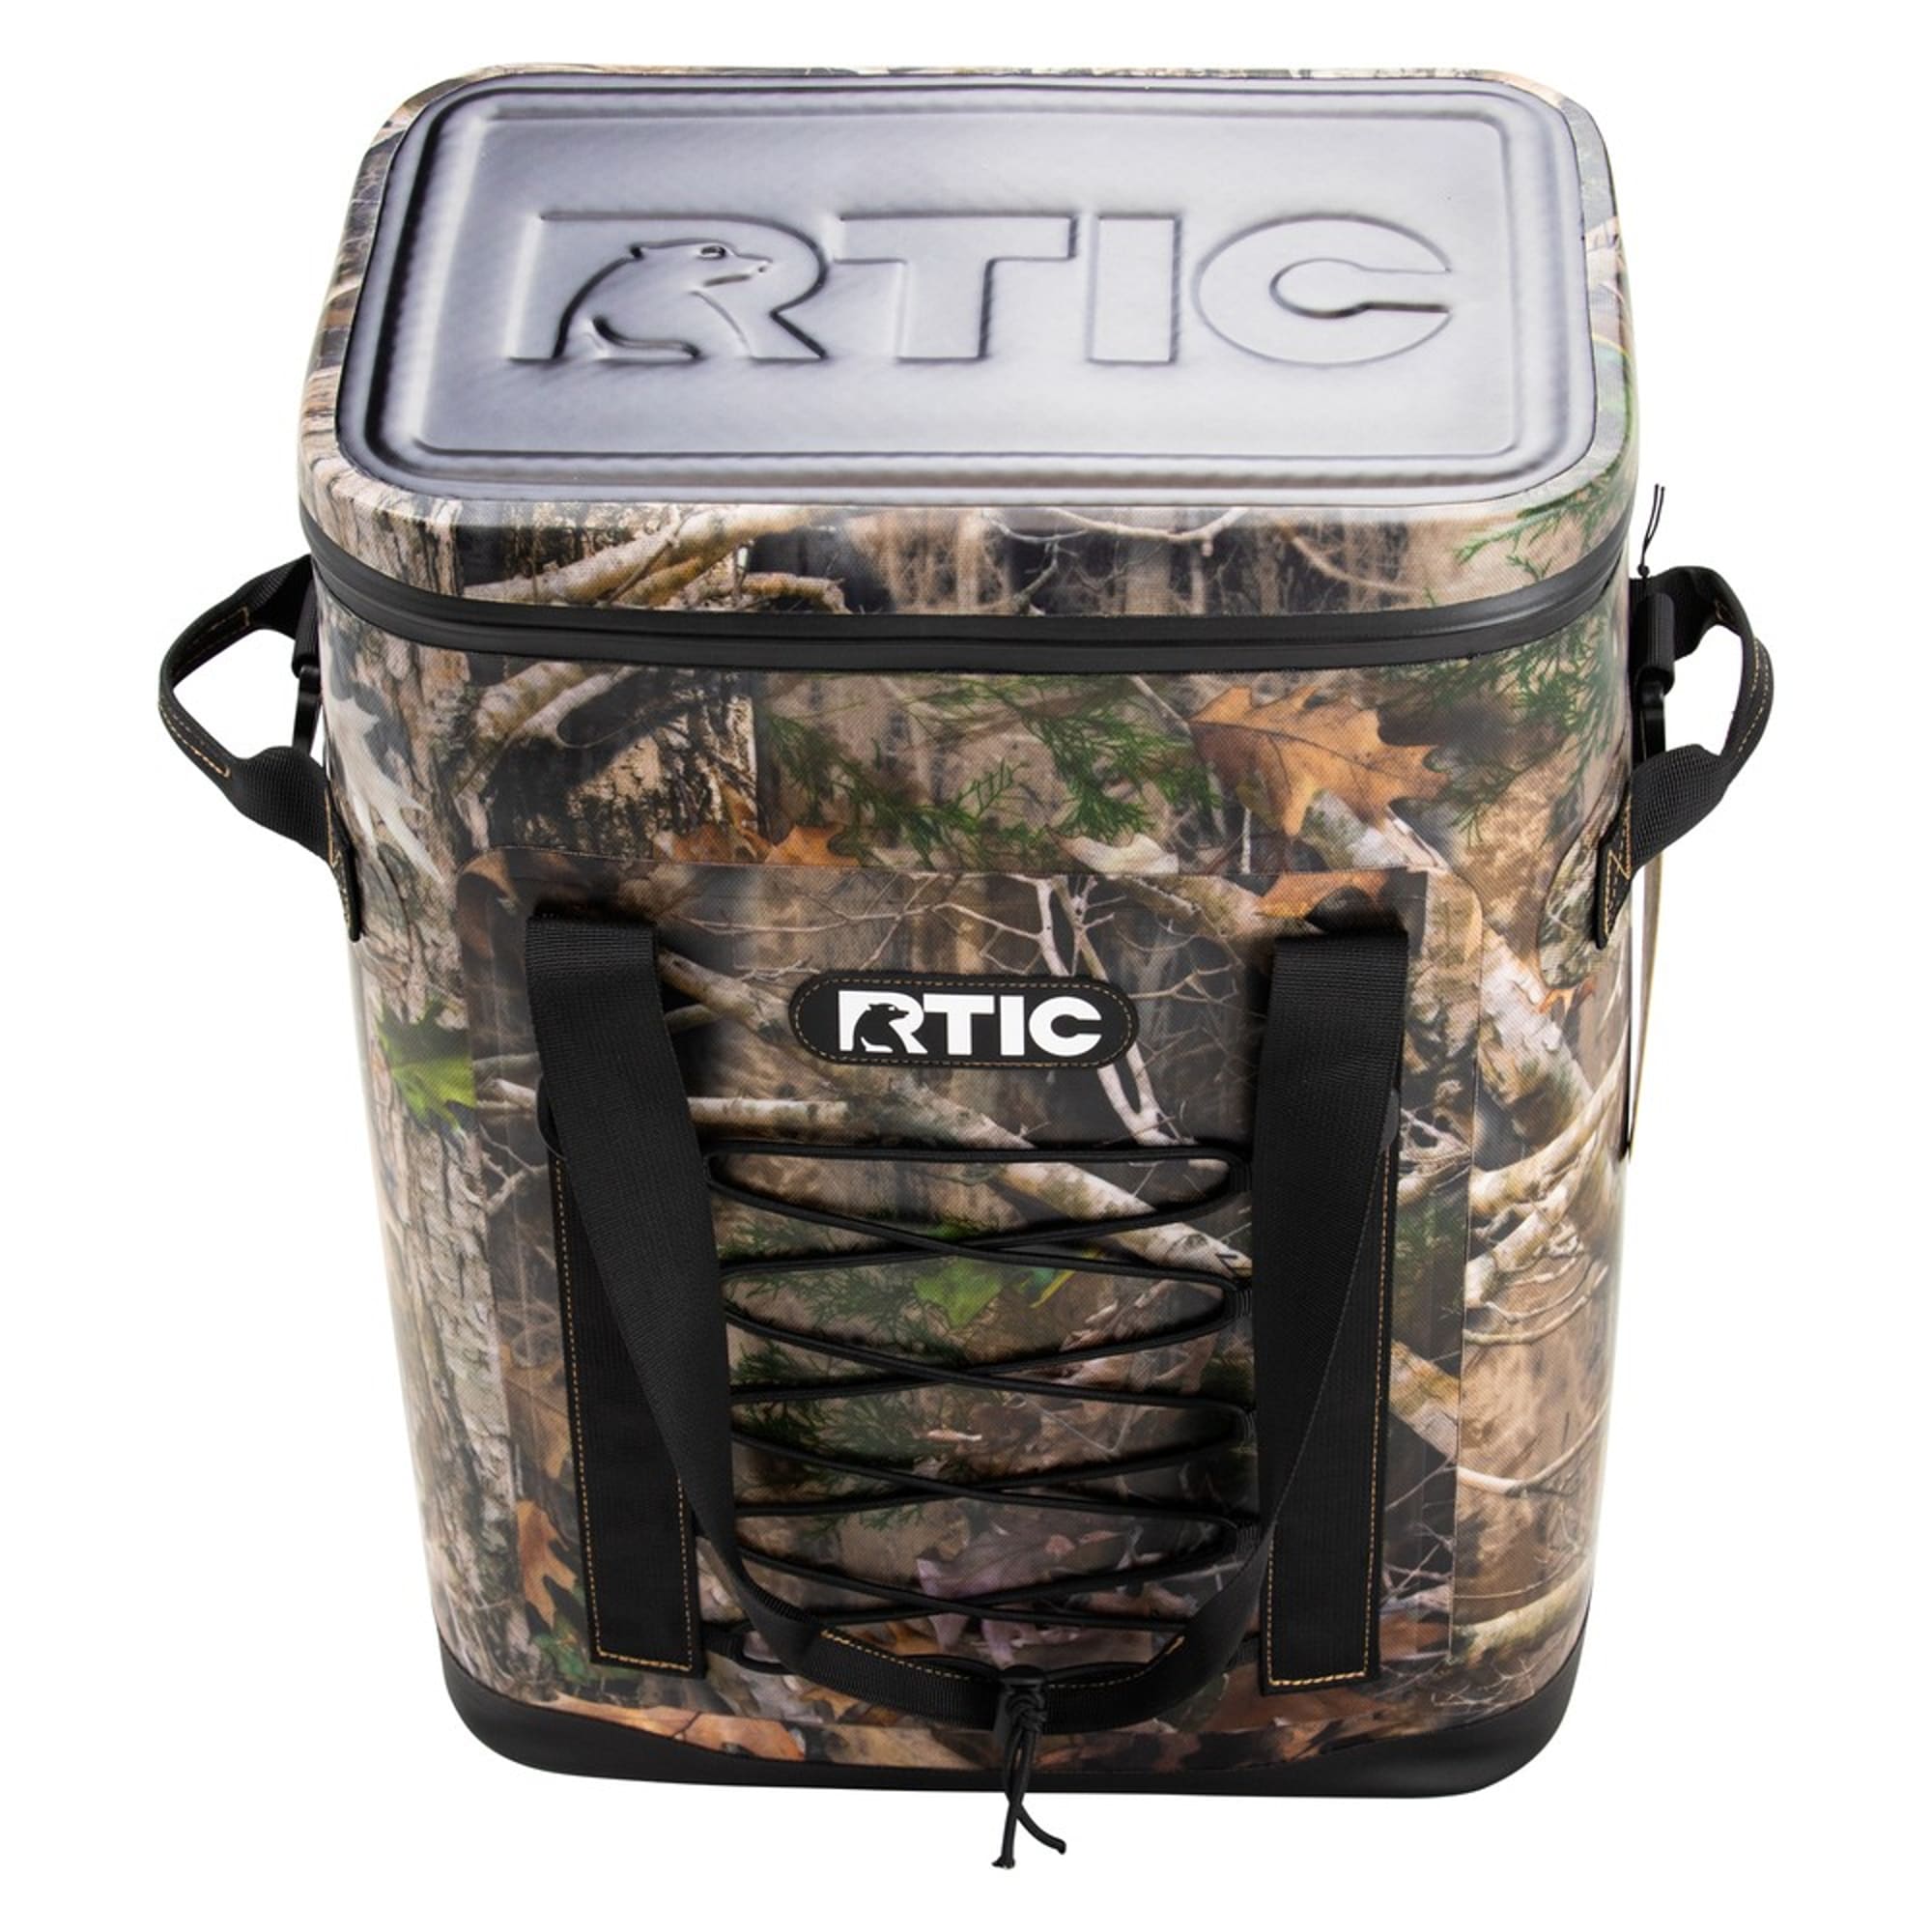  RTIC Backpack Cooler 30 Can, Insulated Portable Soft